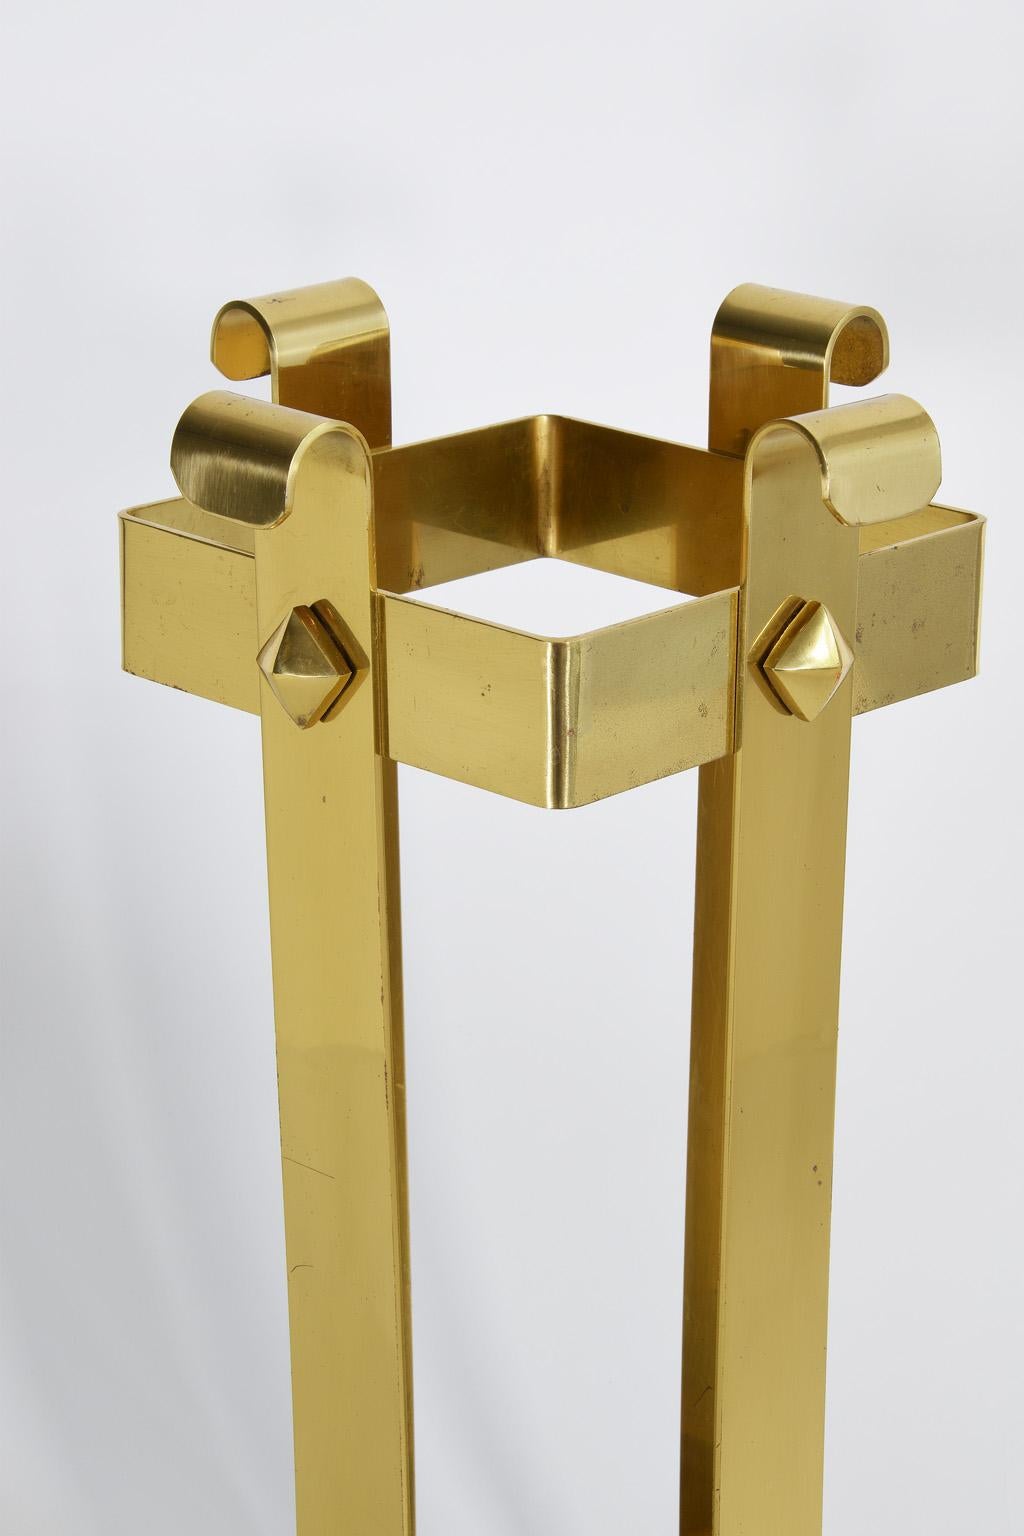 Hollywood Regency midcentury solid brass umbrella stand, Italy, 1960s.